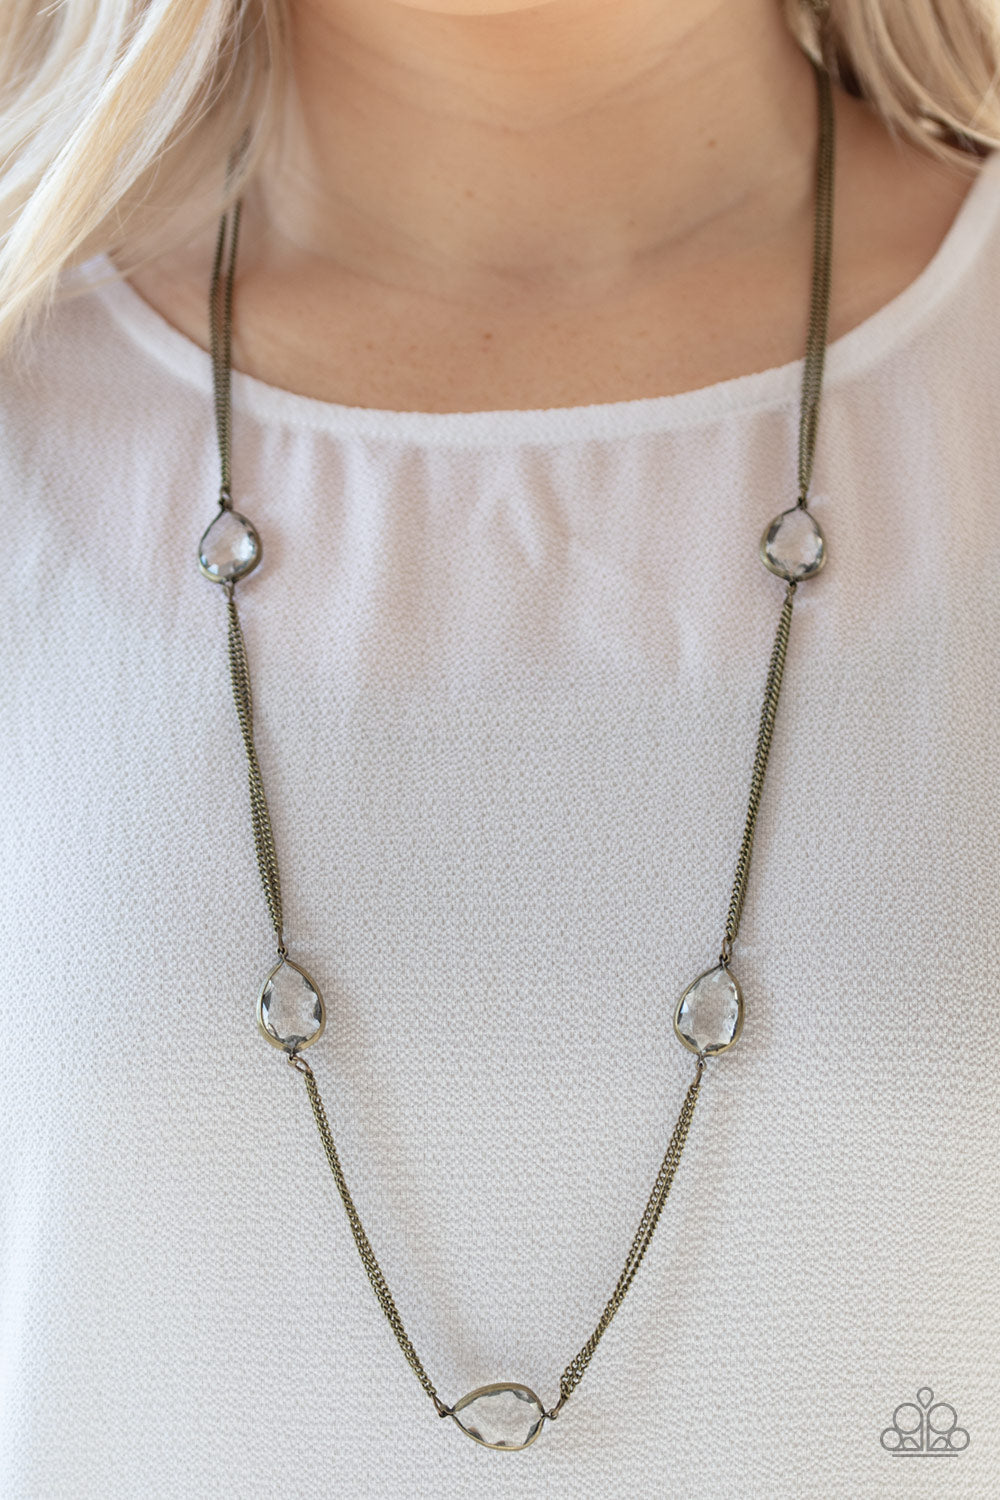 Teardrop Timelessness - Brass Necklace - Paparazzi Accessories - Glassy white teardrops attach to sections of antiqued brass chain across the chest, creating a refined display. Features an adjustable clasp closure. Sold as one individual necklace.